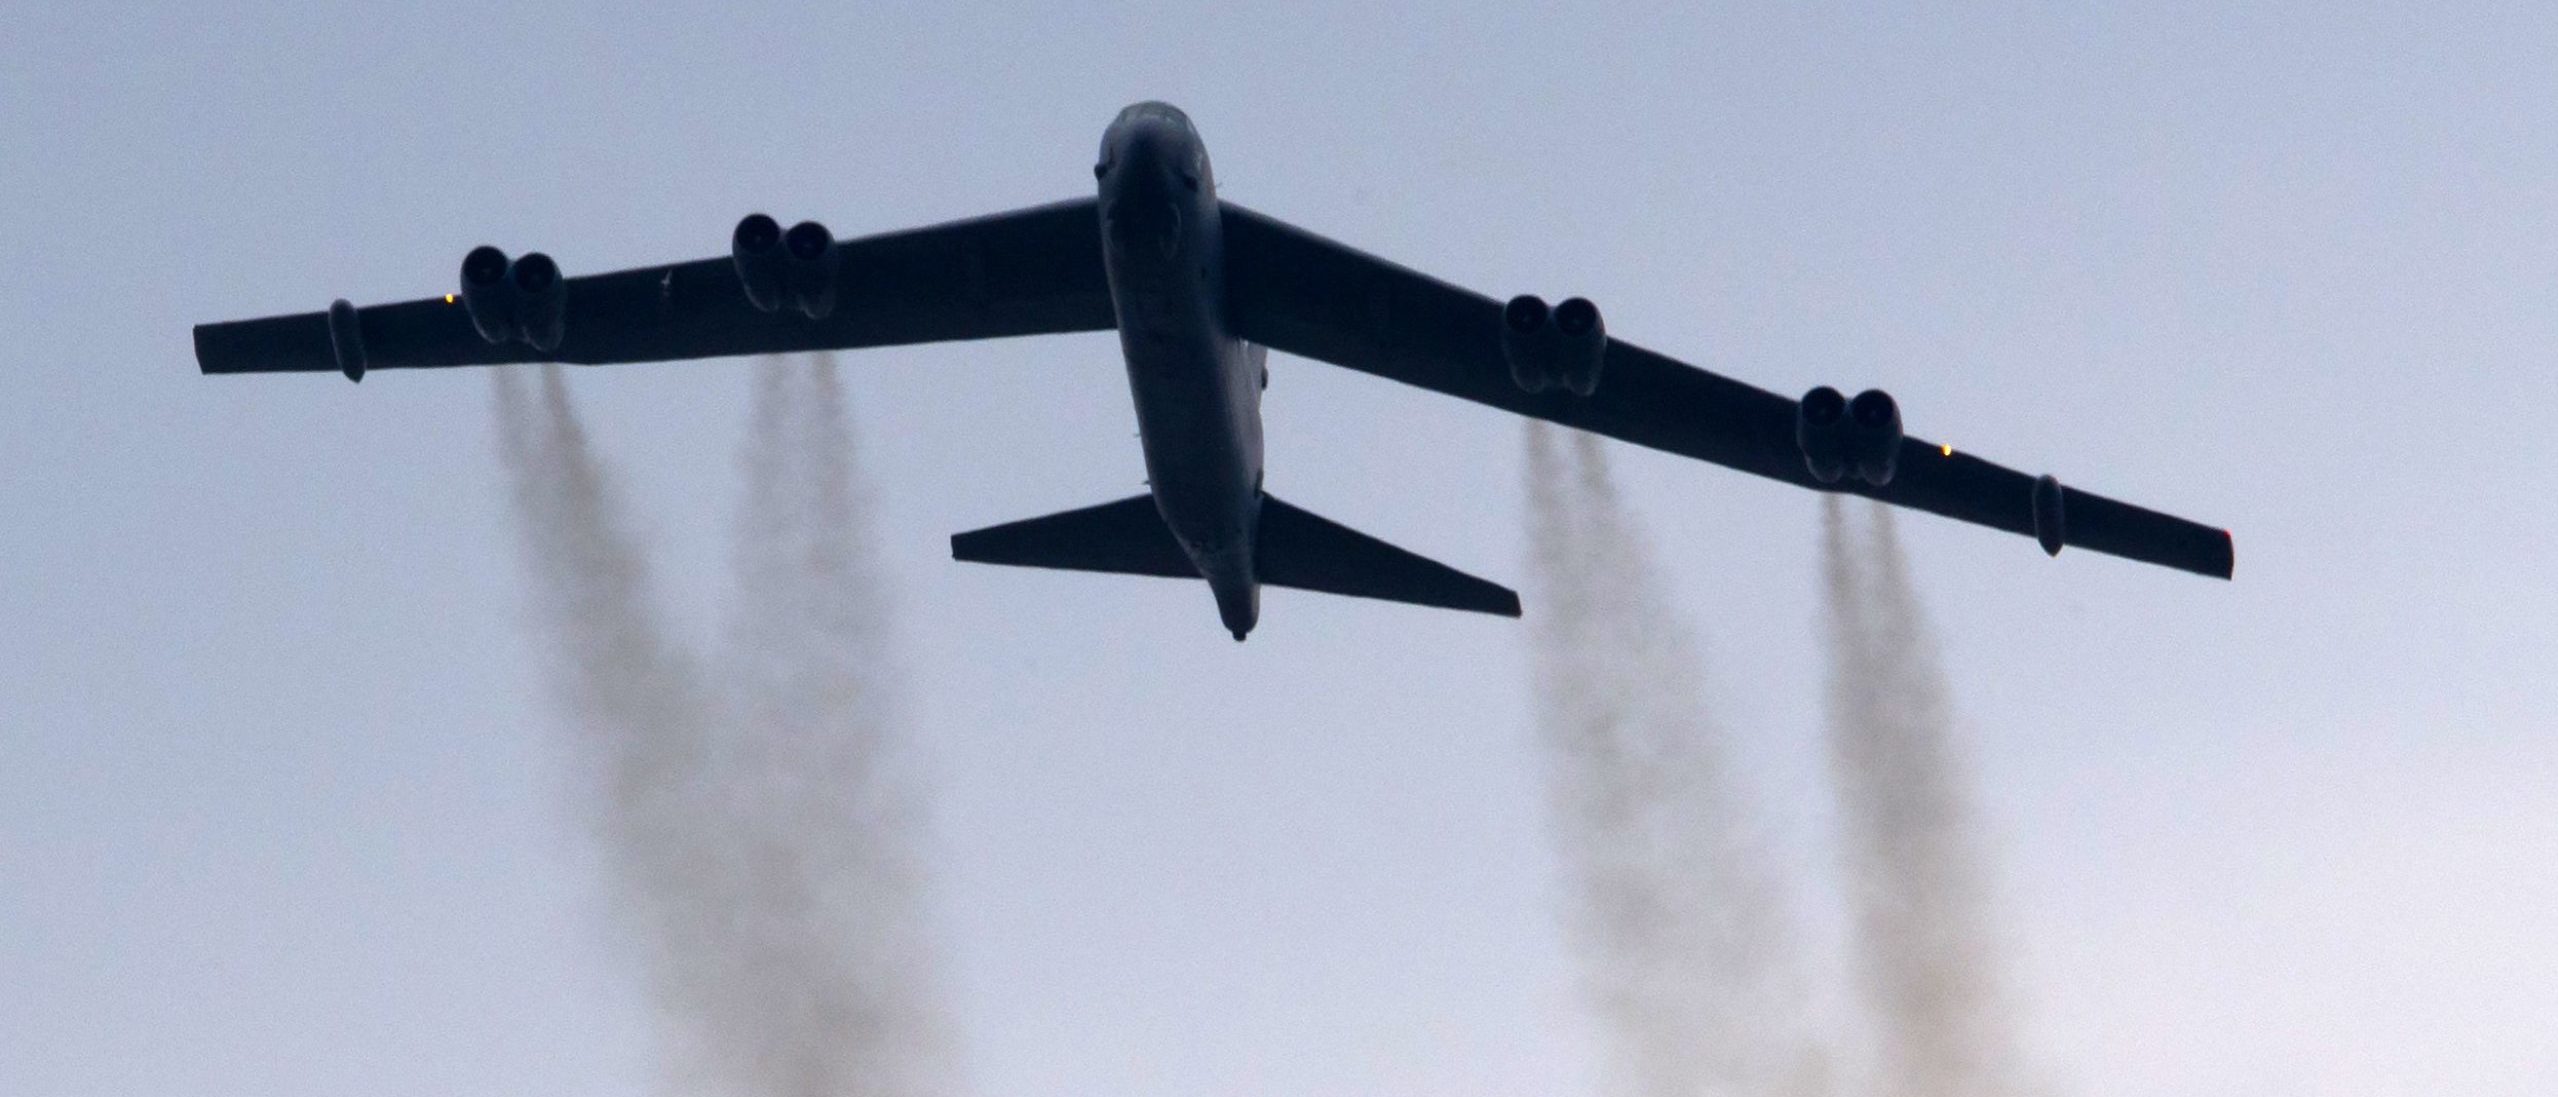 us-flies-b-52-bomber-over-persian-gulf-for-6th-time-since-november